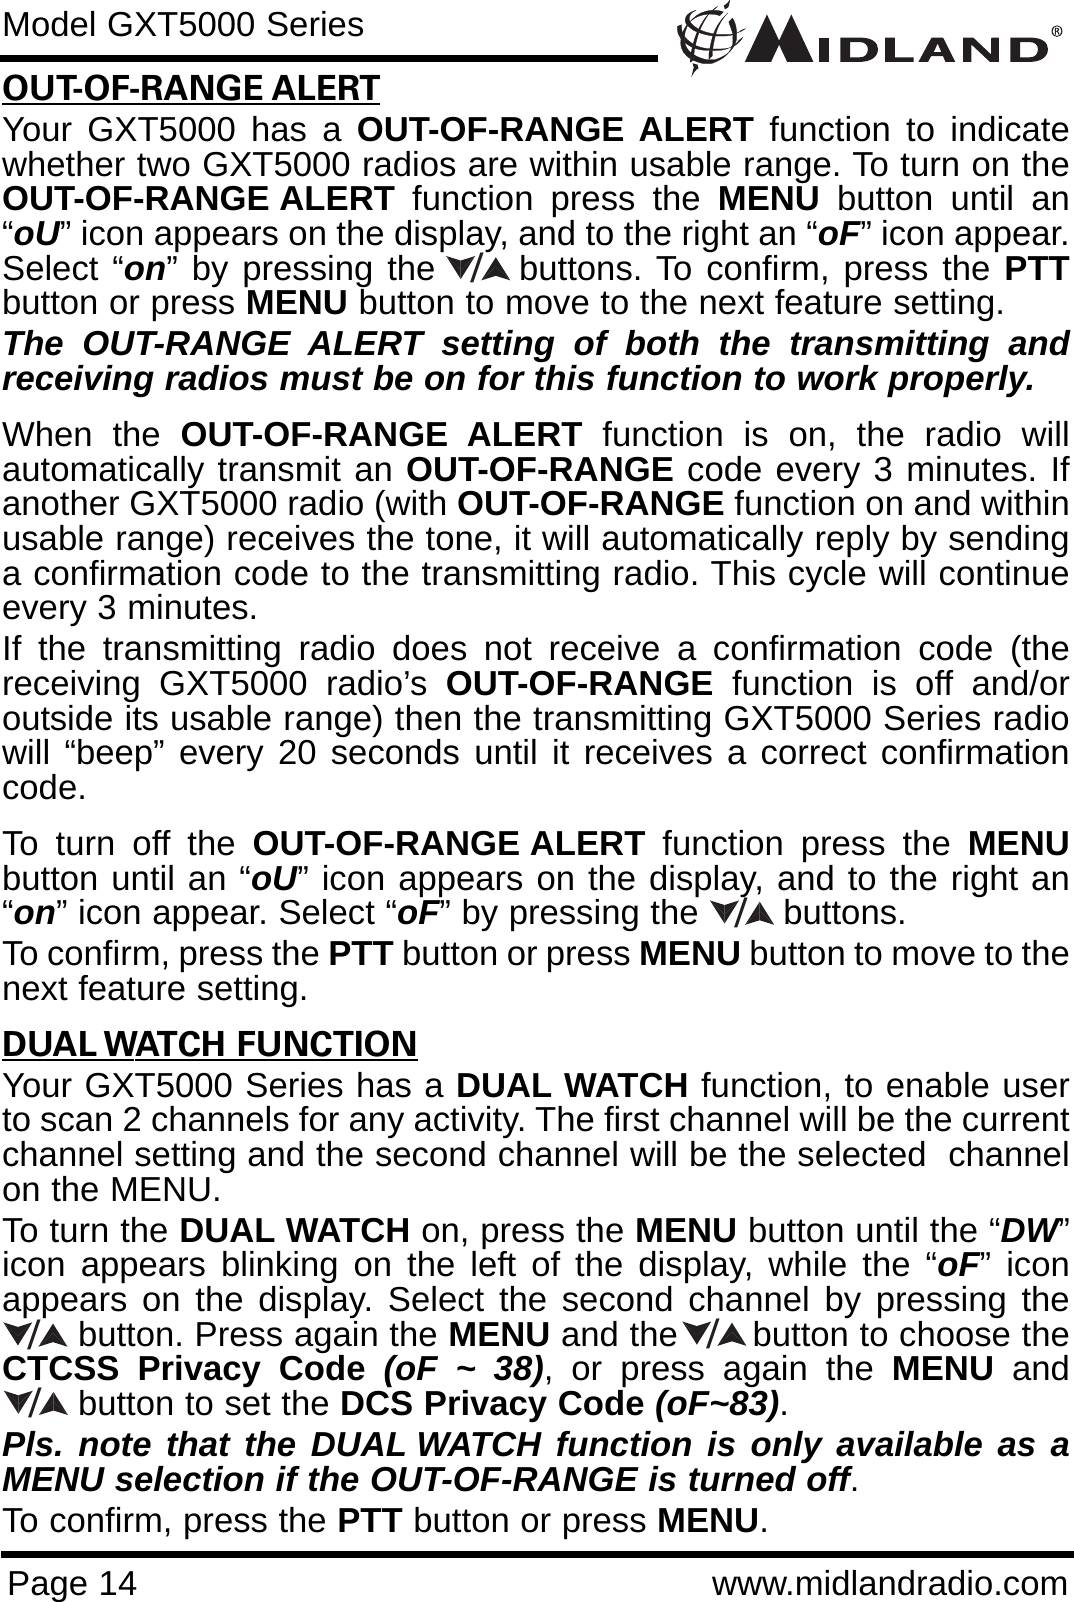 Page 14 www.midlandradio.comModel GXT5000 SeriesOUT-OF-RANGE ALERTYour GXT5000 has a OUT-OF-RANGE ALERT function to indicatewhether two GXT5000 radios are within usable range. To turn on theOUT-OF-RANGE ALERT function press the MENU button until an“oU” icon appears on the display, and to the right an “oF” icon appear.Select “on” by pressing the      buttons. To confirm, press the PTTbutton or press MENU button to move to the next feature setting. The OUT-RANGE ALERT setting of both the transmitting andreceiving radios must be on for this function to work properly.When the OUT-OF-RANGE ALERT function is on, the radio willautomatically transmit an OUT-OF-RANGE code every 3 minutes. Ifanother GXT5000 radio (with OUT-OF-RANGE function on and withinusable range) receives the tone, it will automatically reply by sendinga confirmation code to the transmitting radio. This cycle will continueevery 3 minutes.If the transmitting radio does not receive a confirmation code (thereceiving GXT5000 radio’s OUT-OF-RANGE function is off and/oroutside its usable range) then the transmitting GXT5000 Series radiowill “beep” every 20 seconds until it receives a correct confirmationcode.To turn off the OUT-OF-RANGE ALERT function press the MENUbutton until an “oU” icon appears on the display, and to the right an“on” icon appear. Select “oF” by pressing the        buttons. To confirm, press the PTT button or press MENU button to move to thenext feature setting.DUAL WATCH FUNCTIONYour GXT5000 Series has a DUAL WATCH function, to enable userto scan 2 channels for any activity. The first channel will be the currentchannel setting and the second channel will be the selected  channelon the MENU.To turn the DUAL WATCH on, press the MENU button until the “DW”icon appears blinking on the left of the display, while the “oF” iconappears on the display. Select the second channel by pressing thebutton. Press again the MENU and the       button to choose theCTCSS Privacy Code (oF ~ 38), or press again the MENU andbutton to set the DCS Privacy Code (oF~83). Pls. note that the DUAL WATCH function is only available as aMENU selection if the OUT-OF-RANGE is turned off. To confirm, press the PTT button or press MENU./////